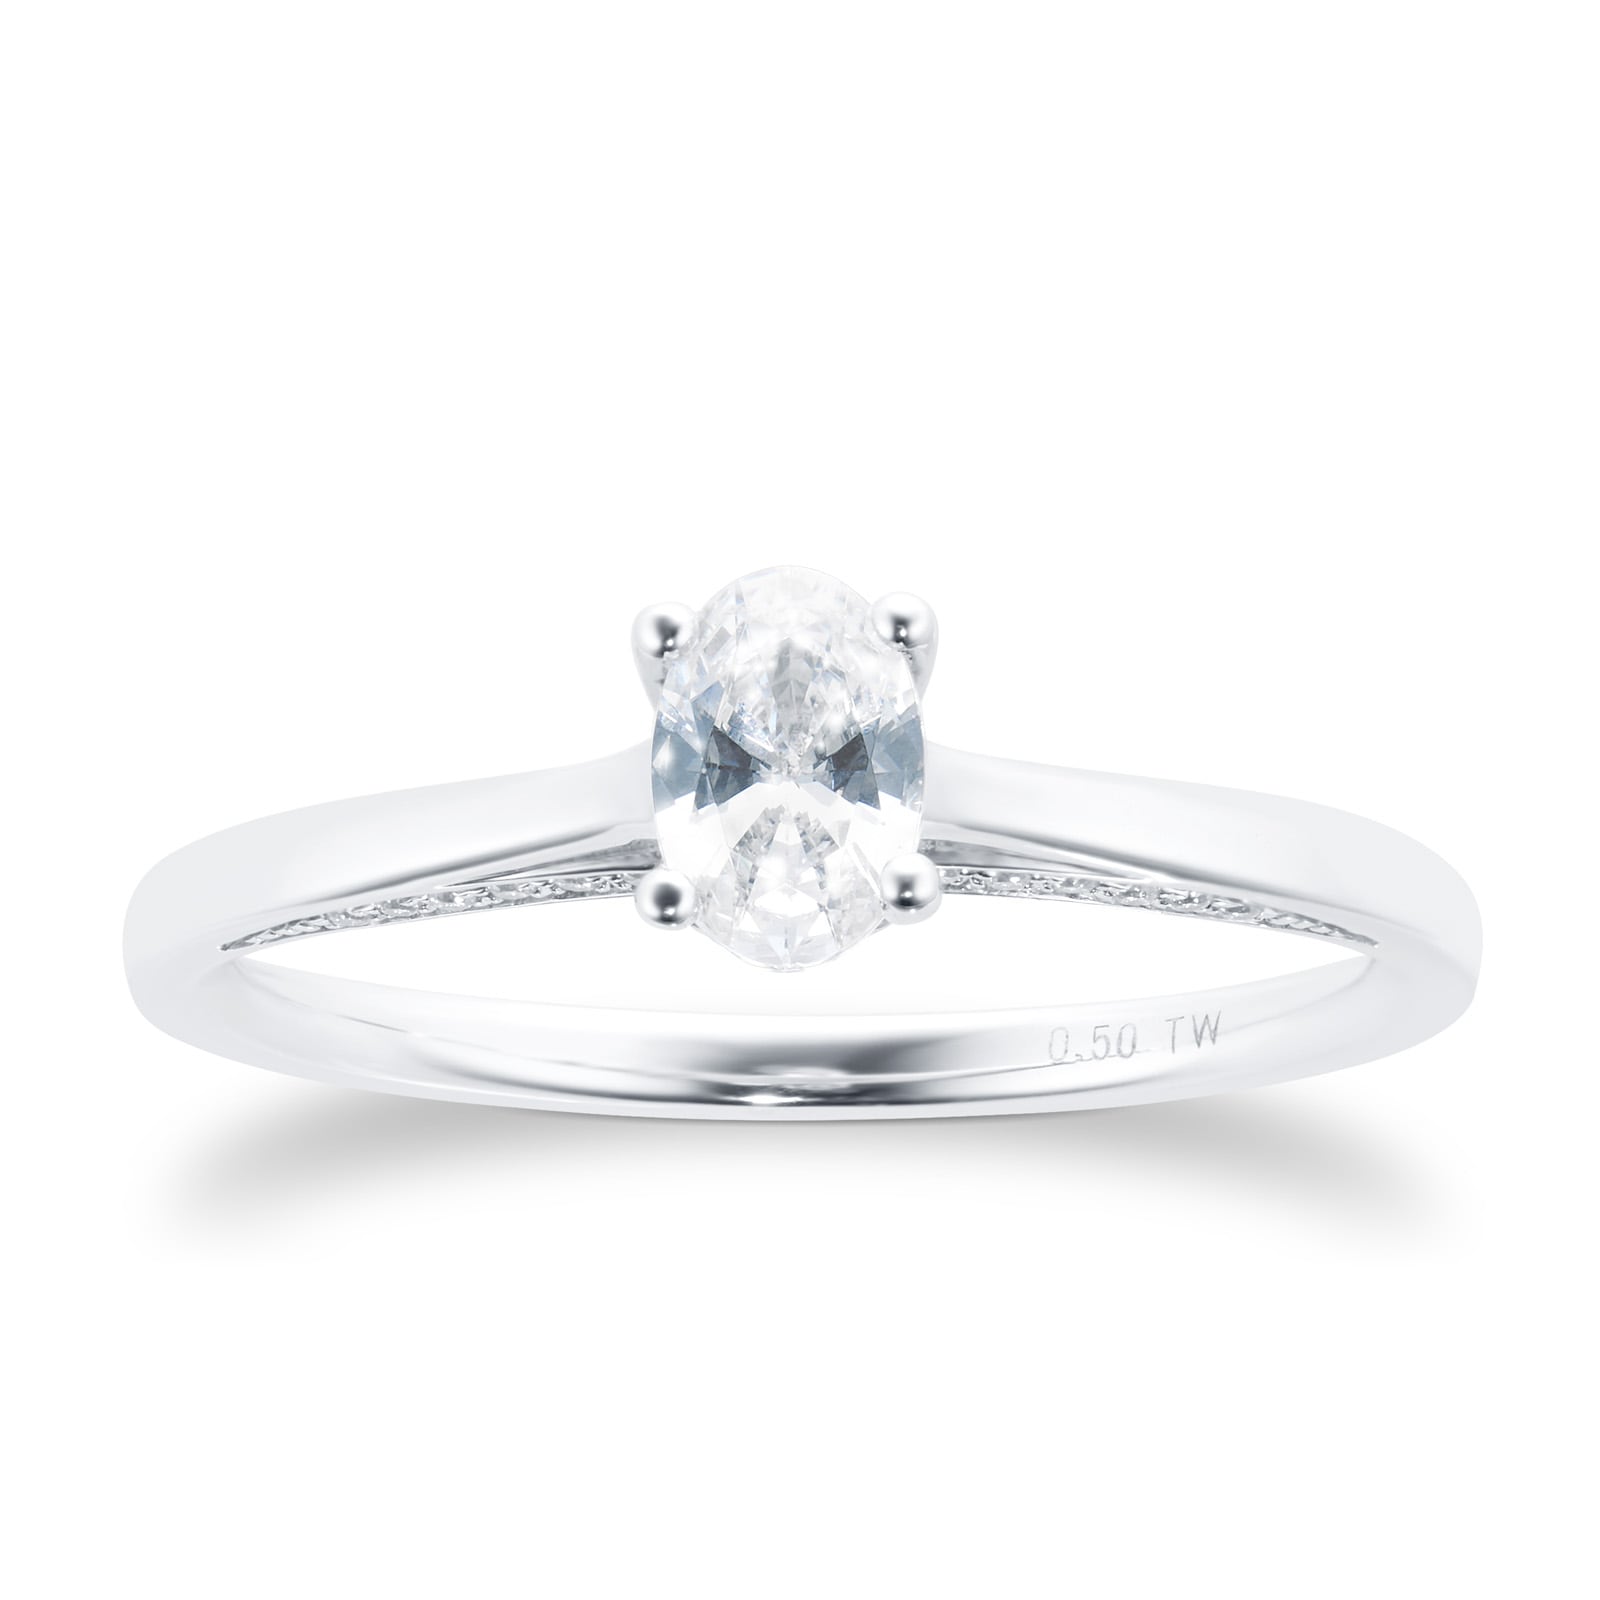 Platinum 0.50cttw Oval Cut Diamond Ring - Ring Size O